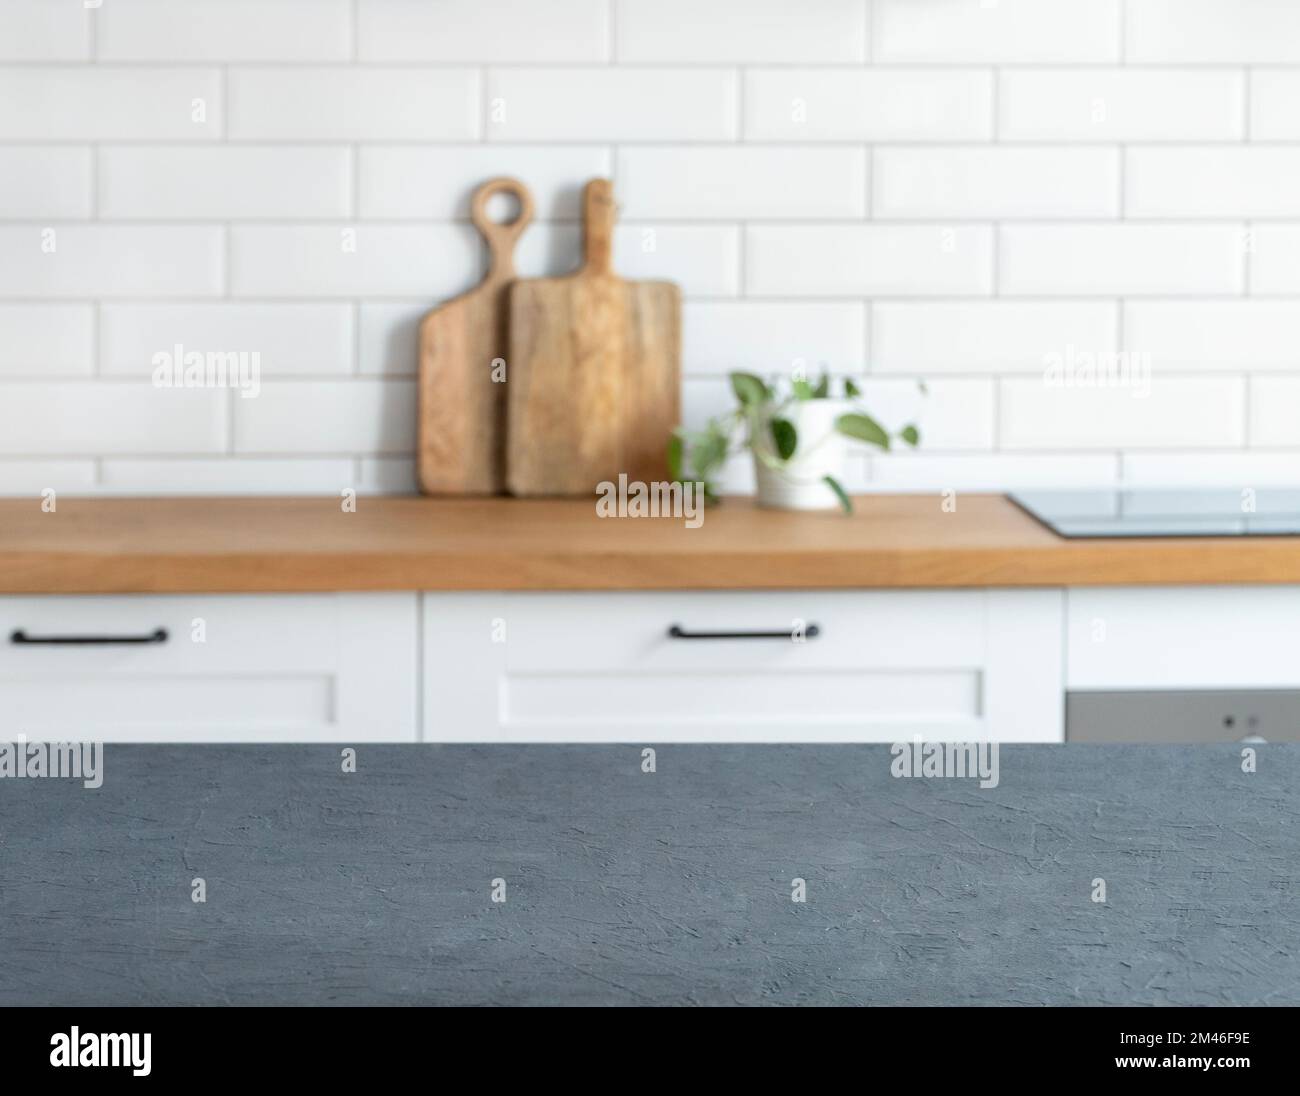 Wooden blue countertop with free space for mounting a product or layout against the background of a blurred white kitchen with cutting board and plant Stock Photo